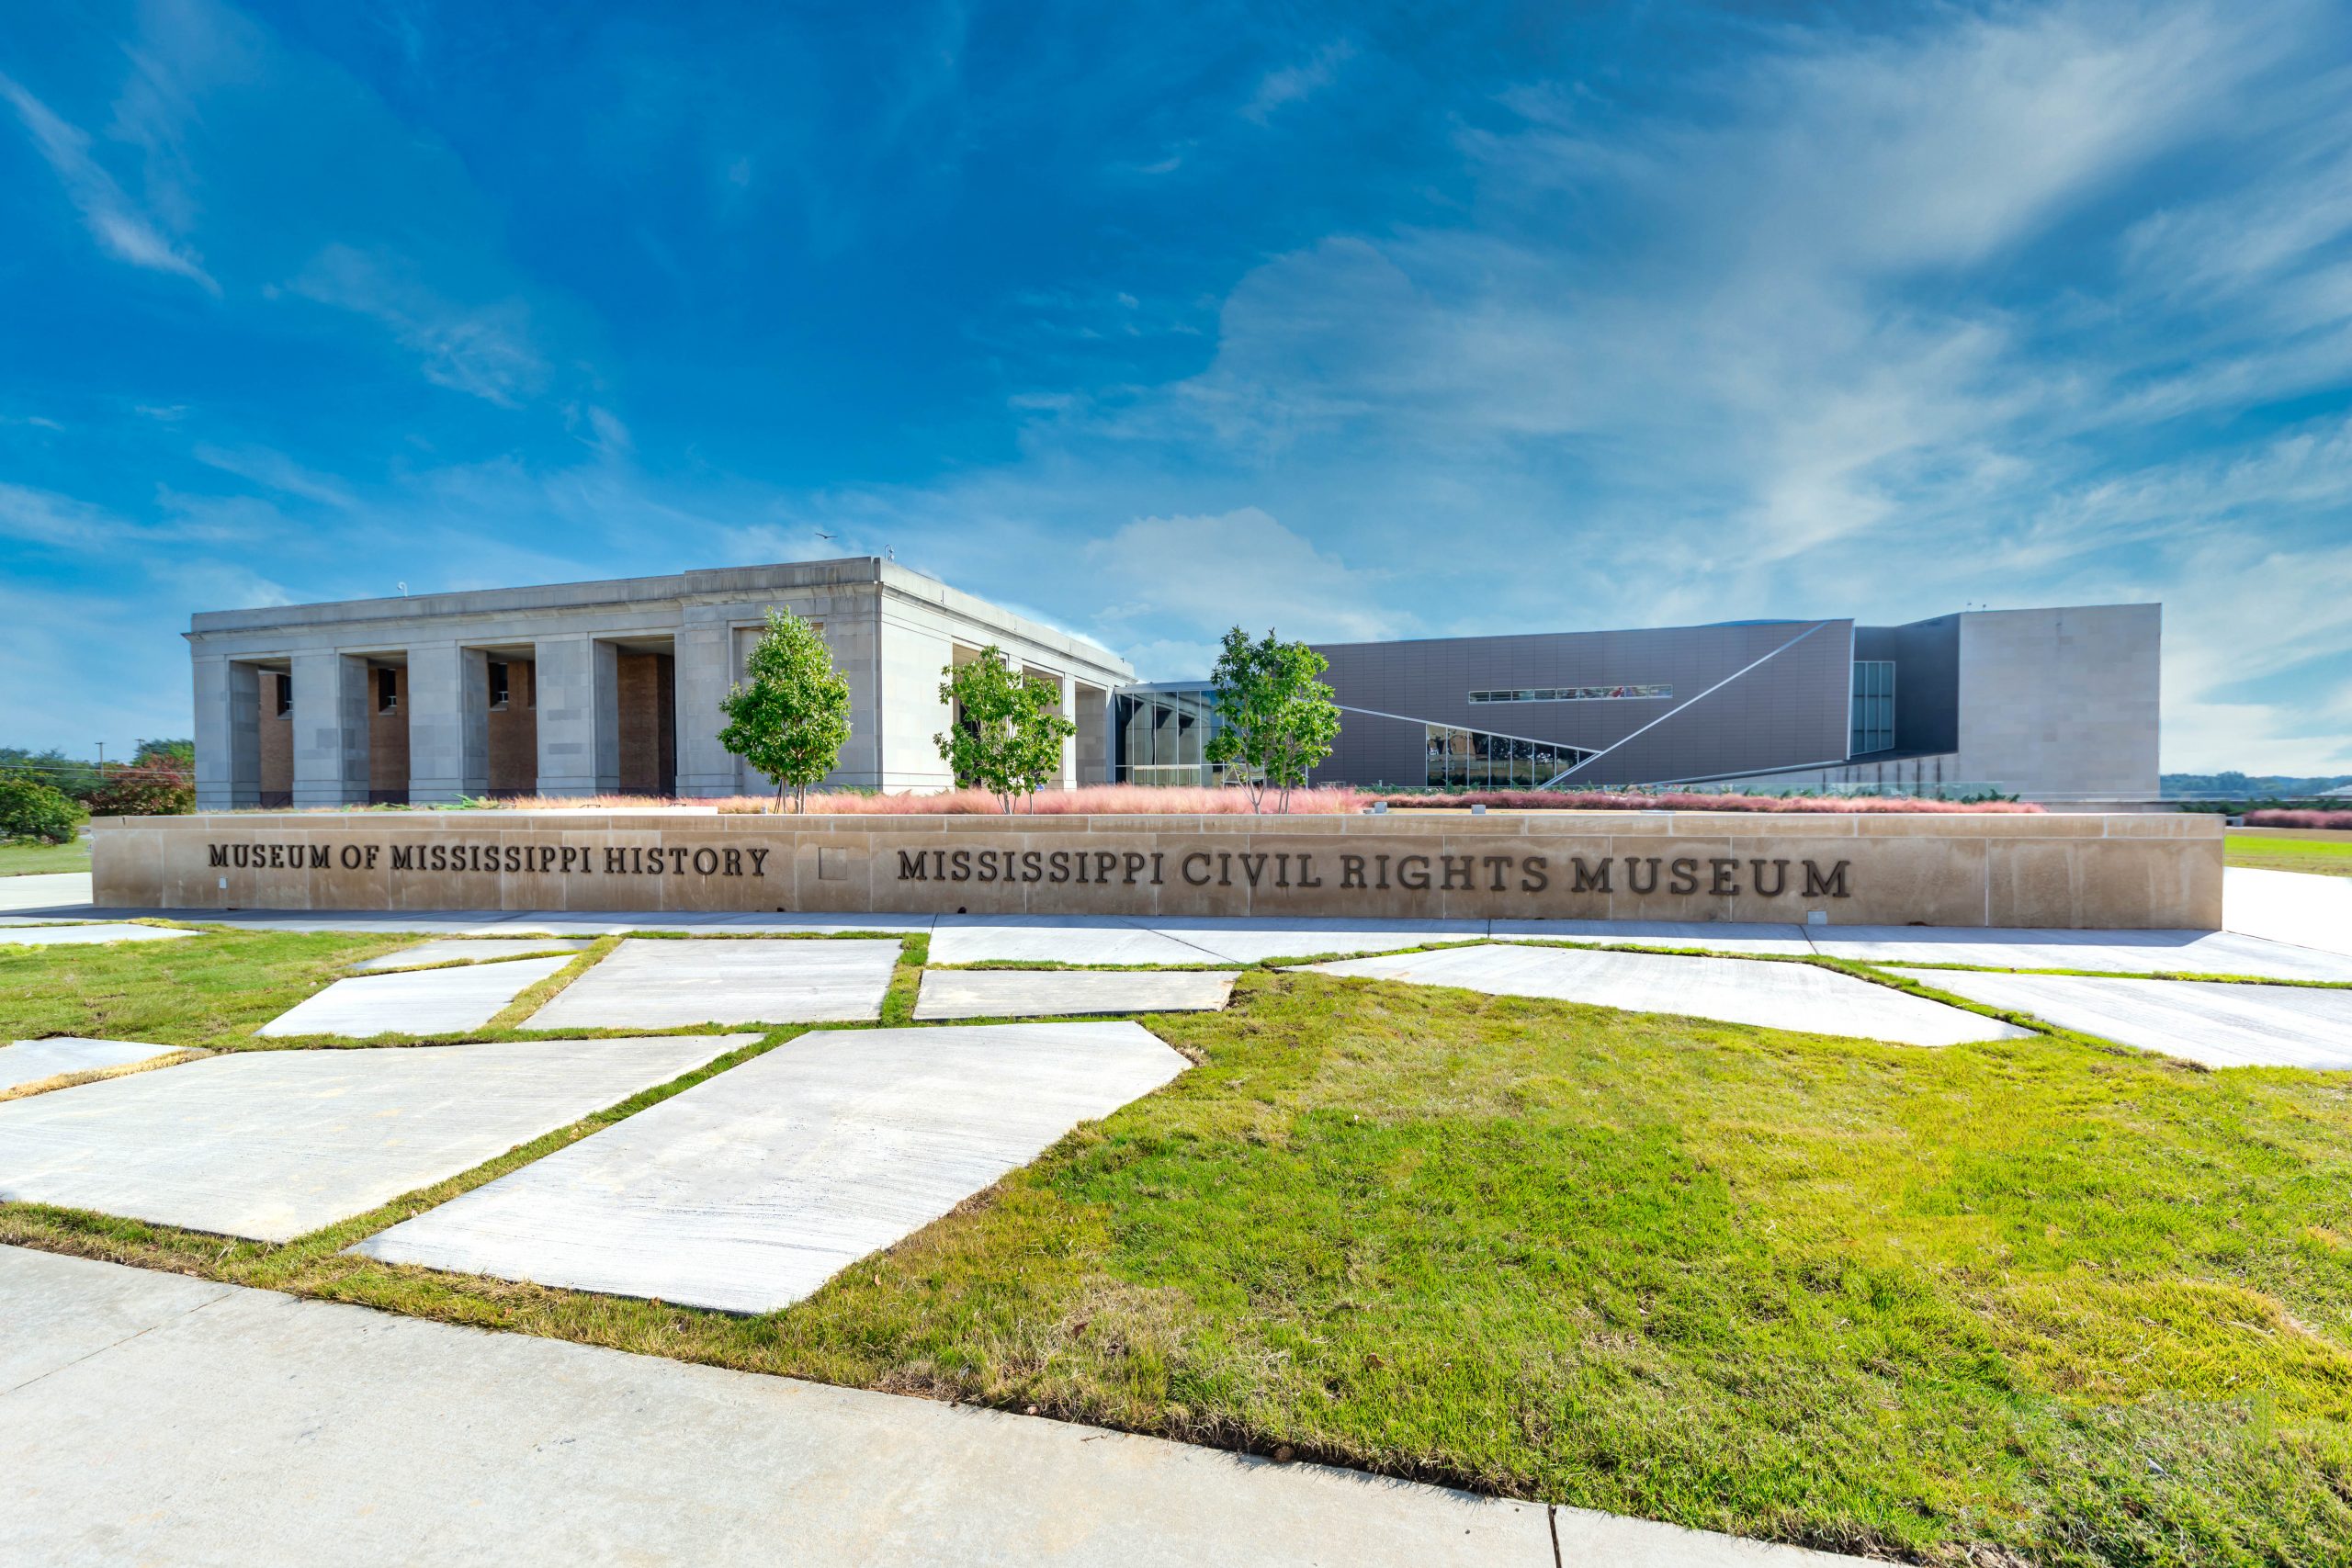 Exterior of the Museum of Mississippi History, Mississippi Department of Archives and History showing blue sky, a one story building, and in the foreground flagstone on a grass yard.